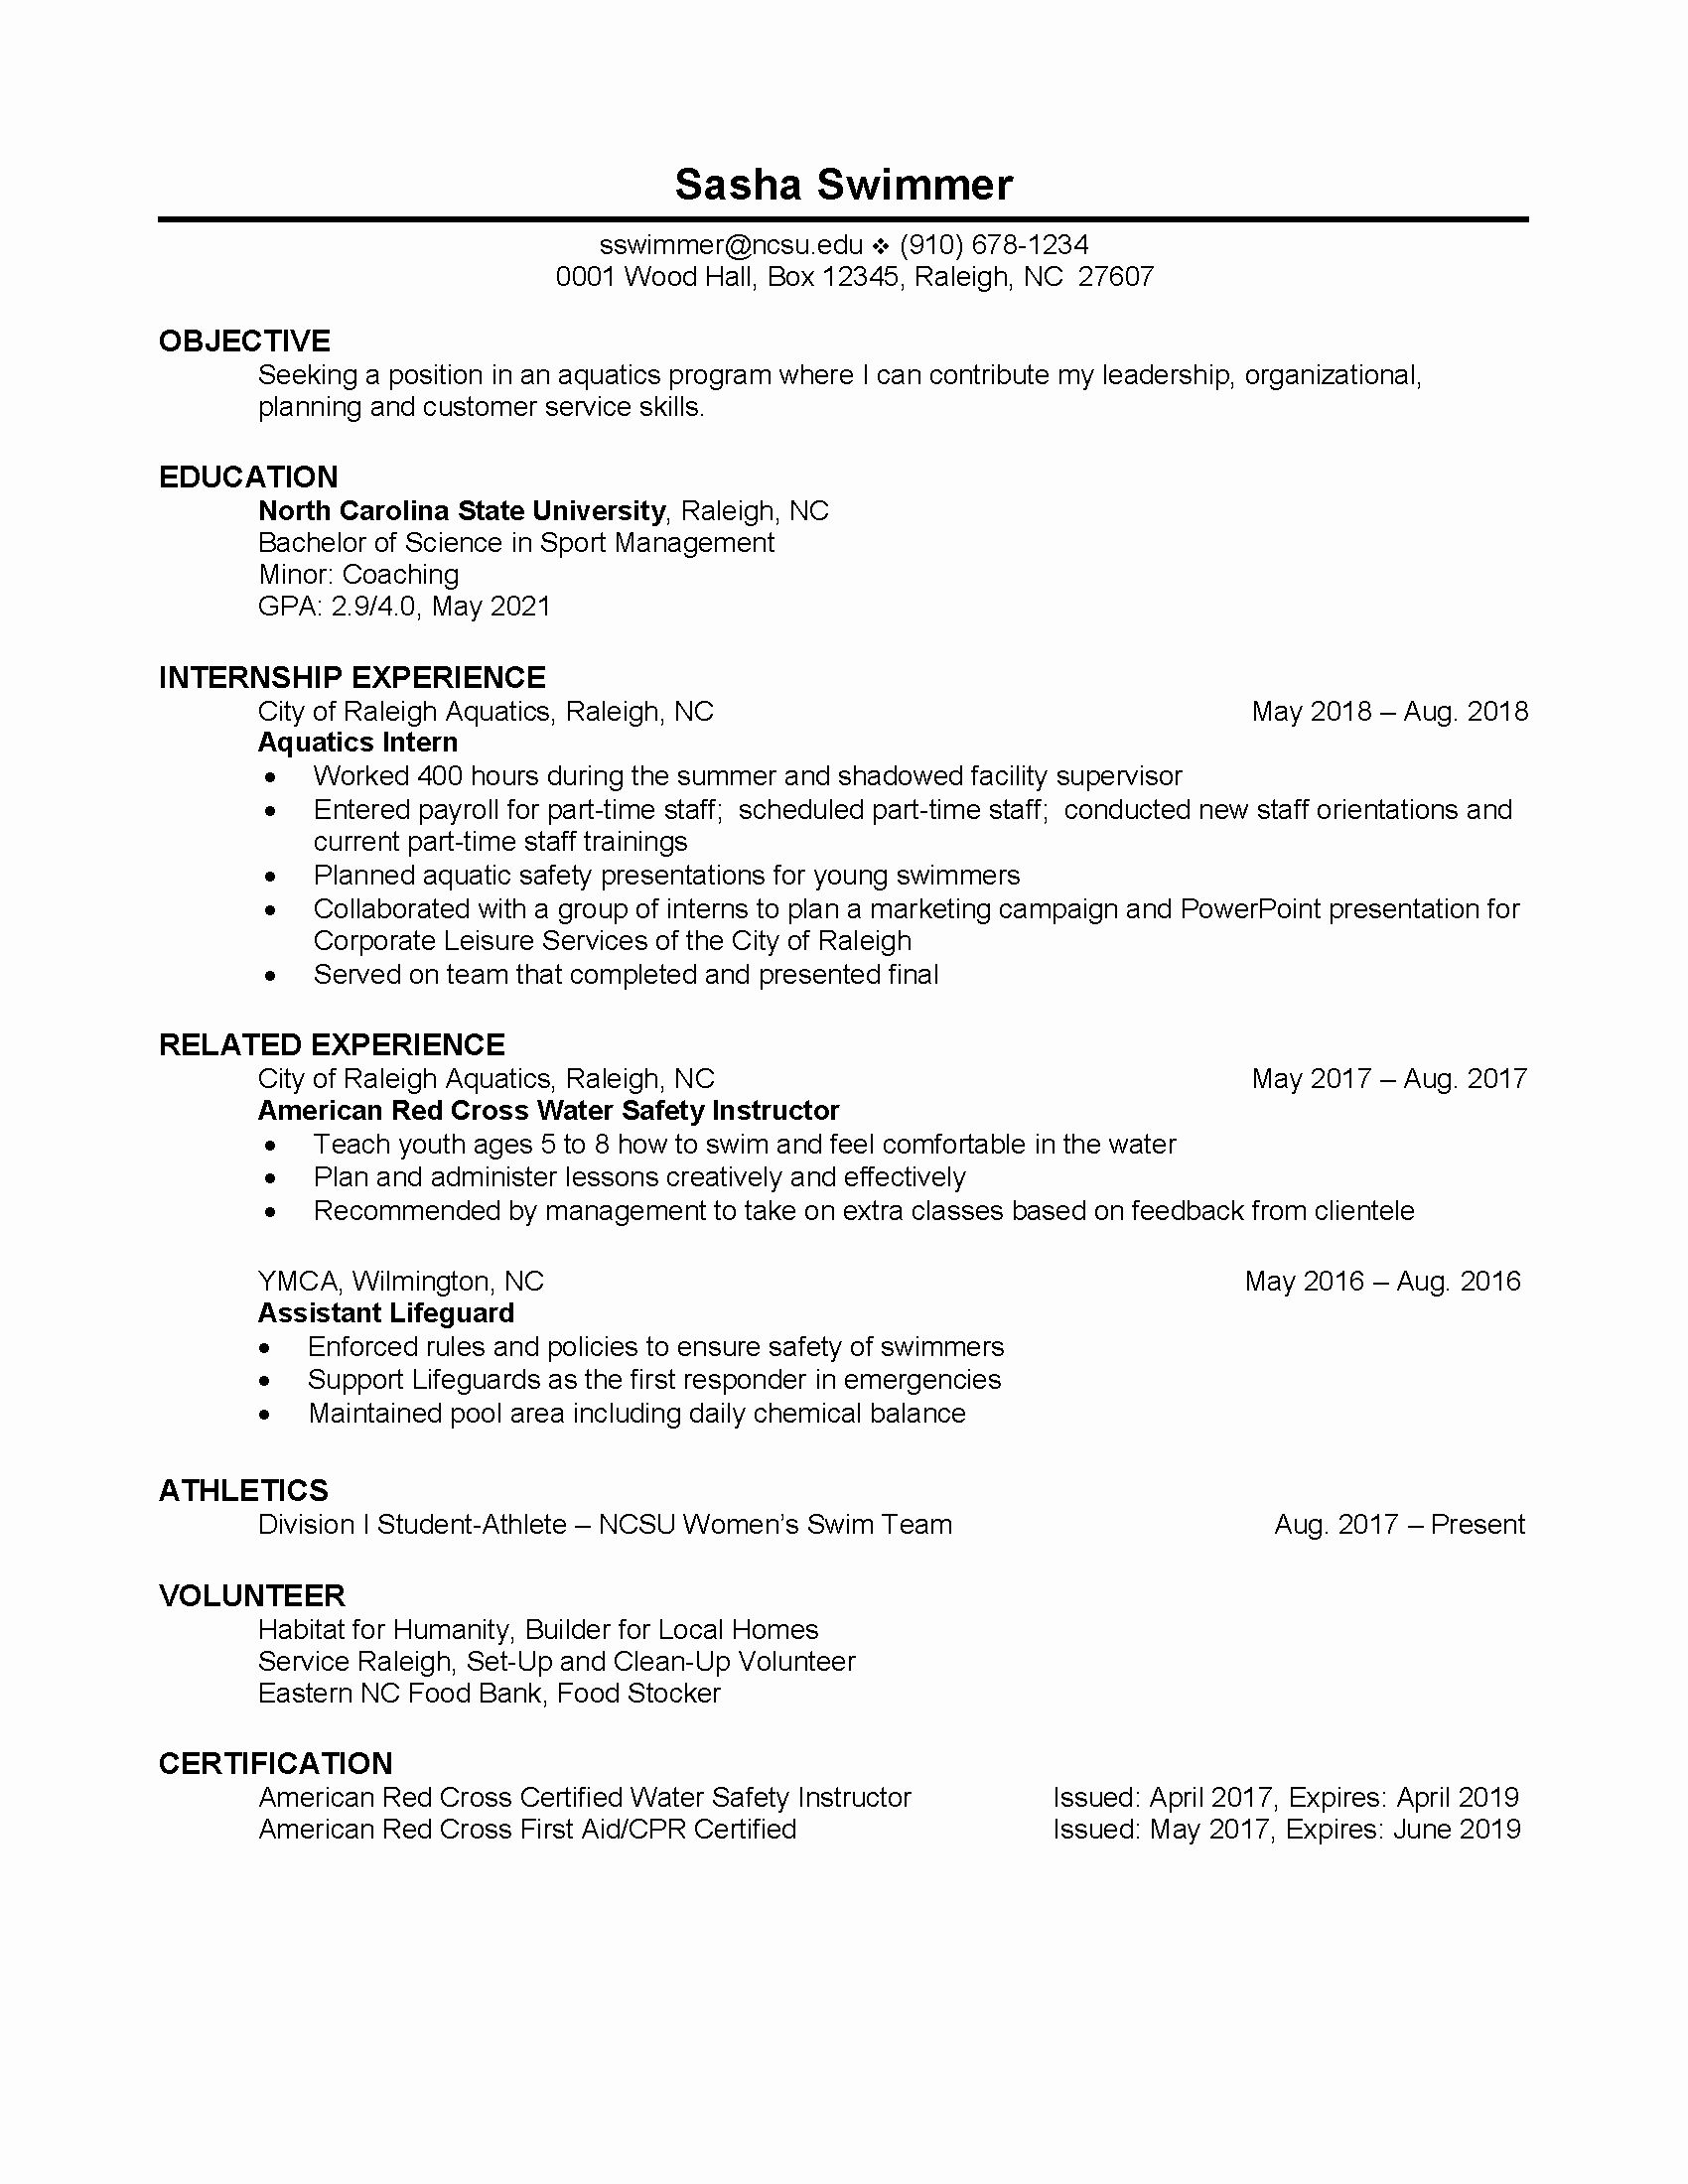 23 Student athlete Resume Example in 2020